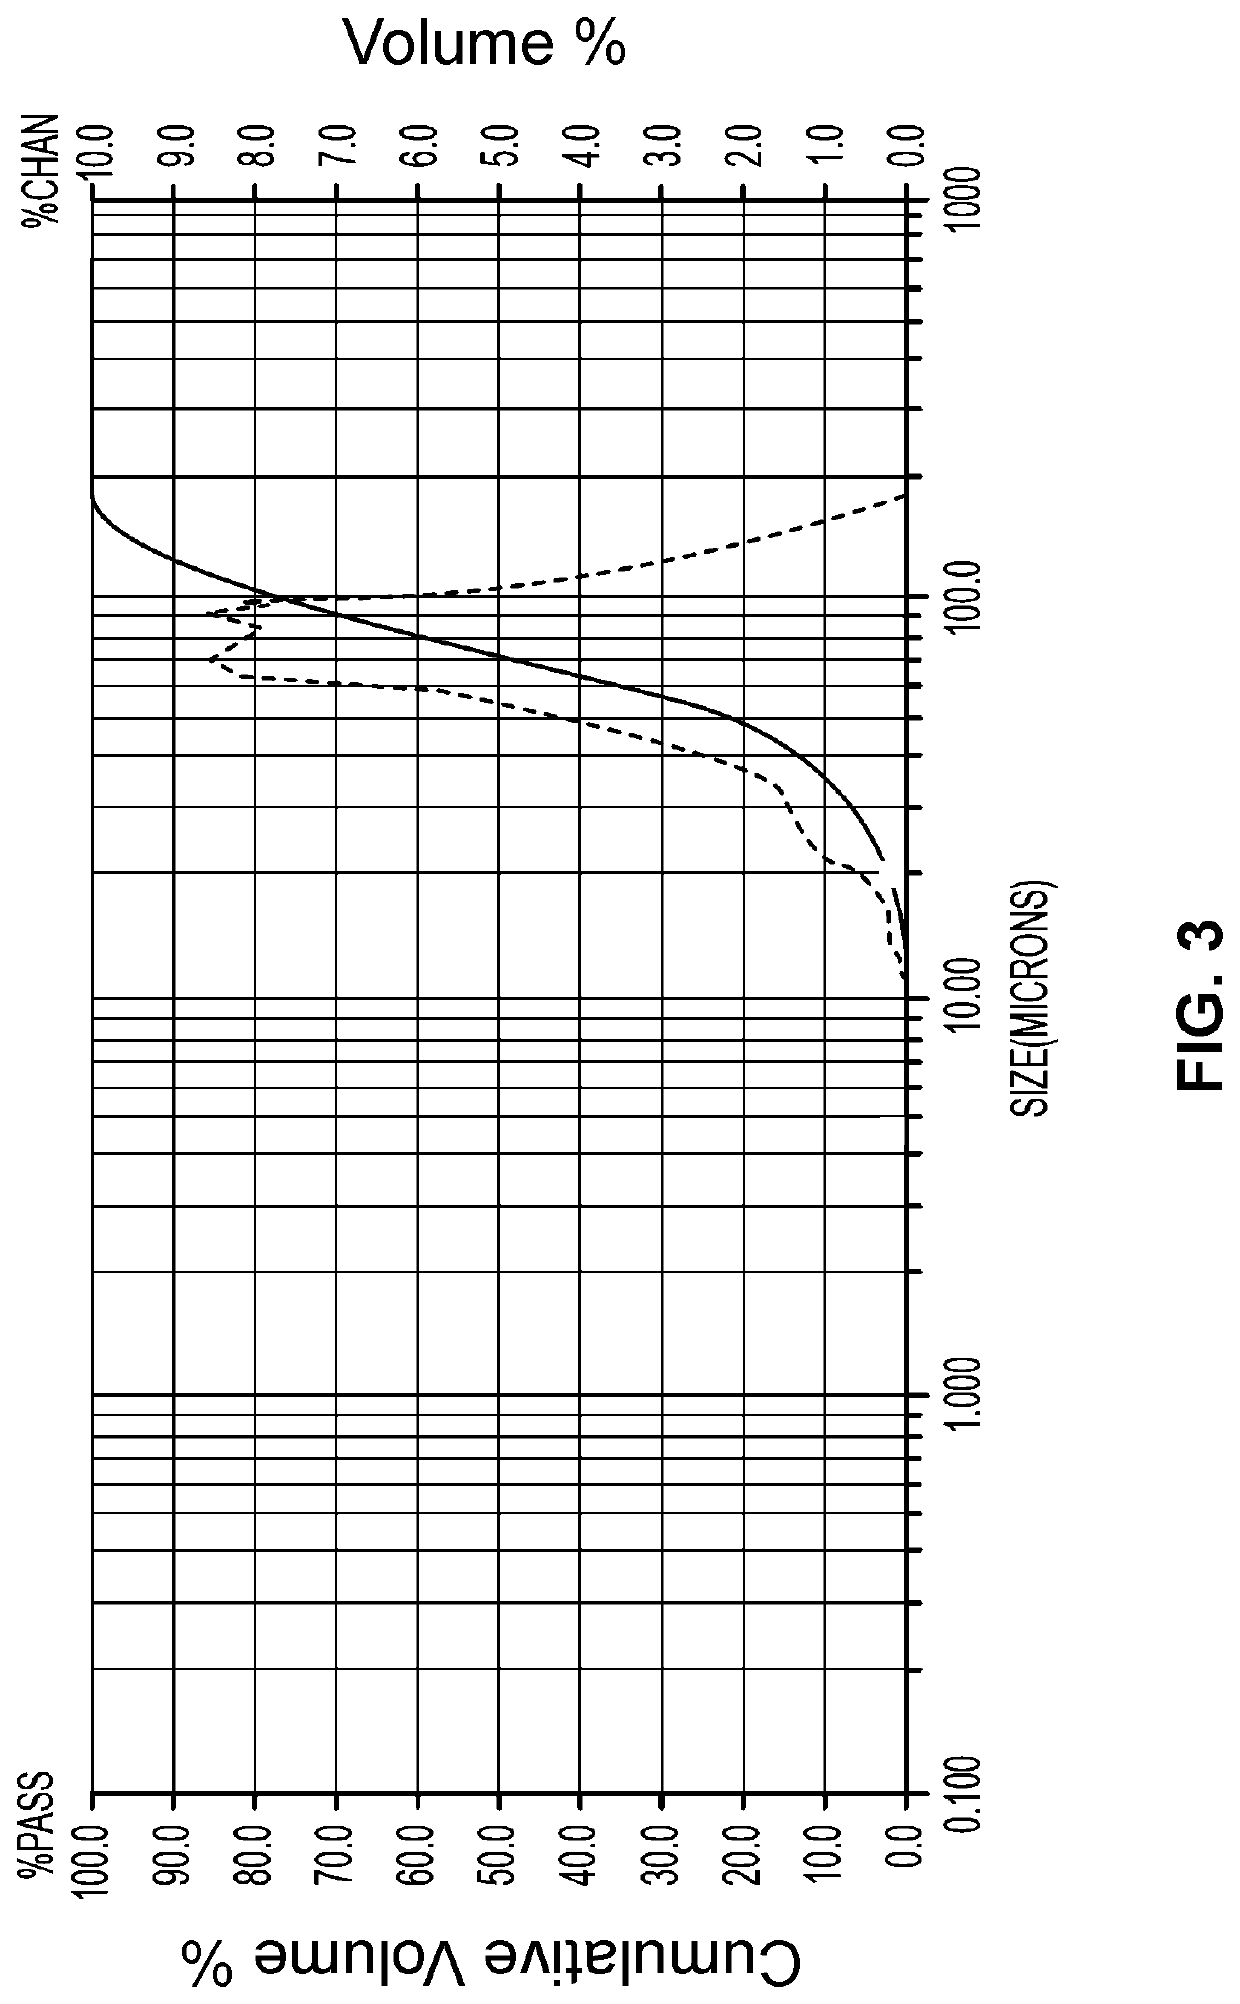 Dispersions for impregnating arrangements of fibers with thermoplastic materials and systems for and methods of using the same